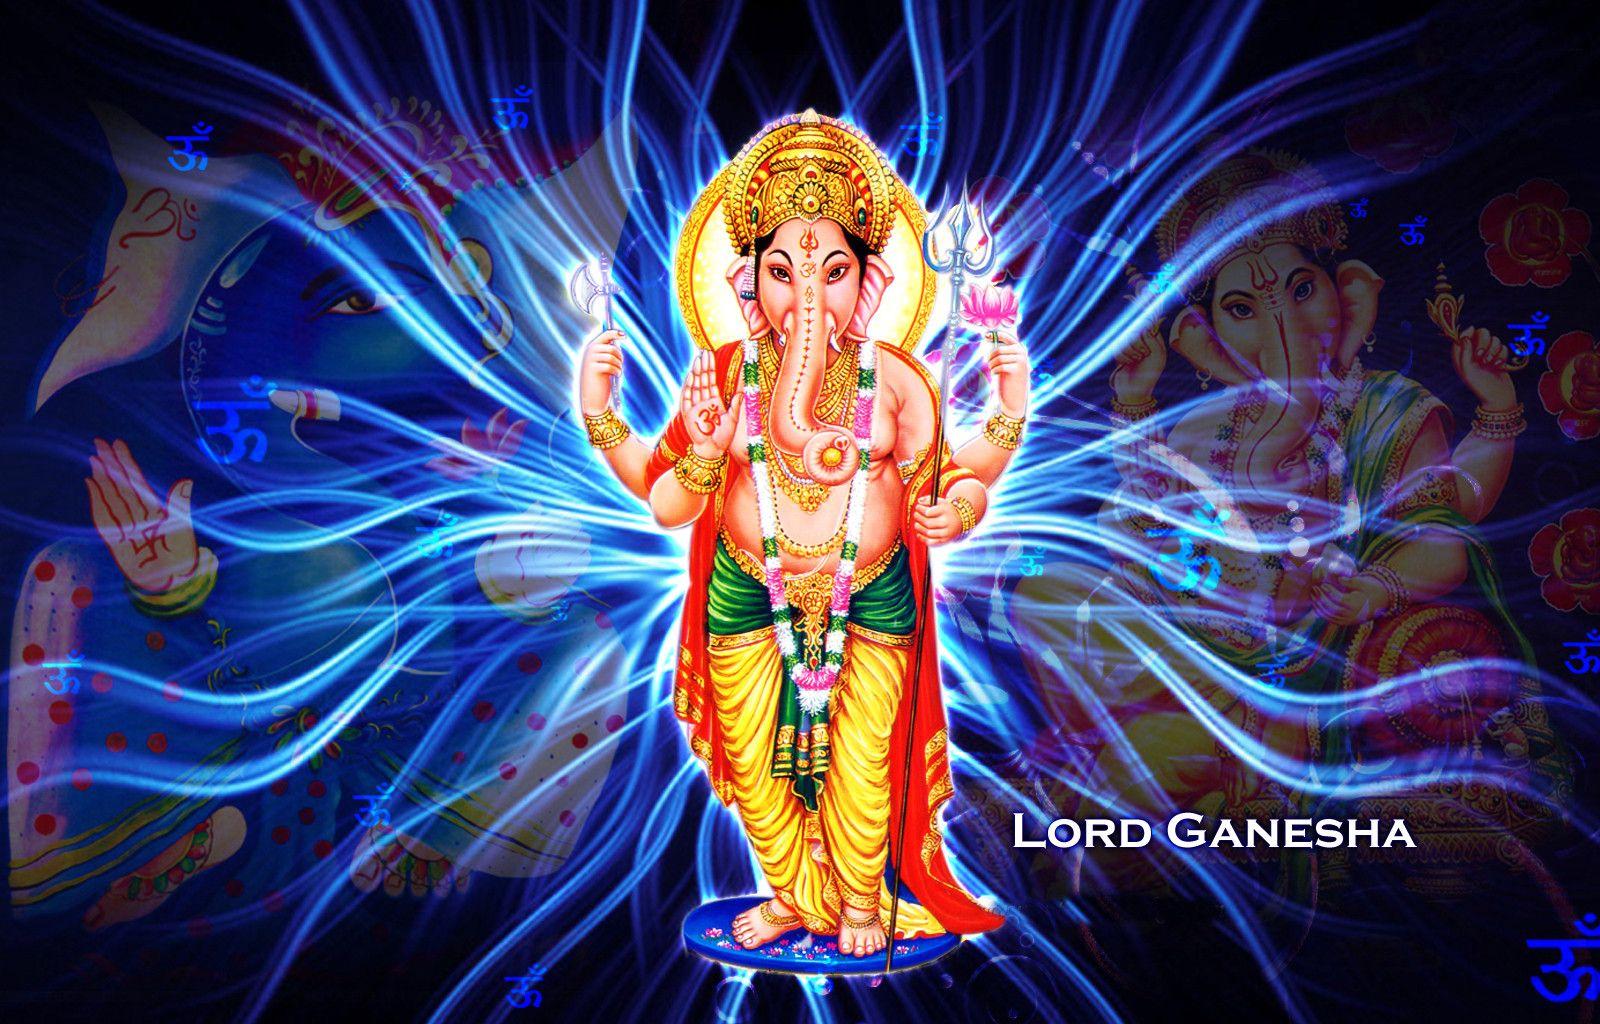 Lord Ganesha Wallpaper Gallery Of God Showy 3D Animated Wallpaper